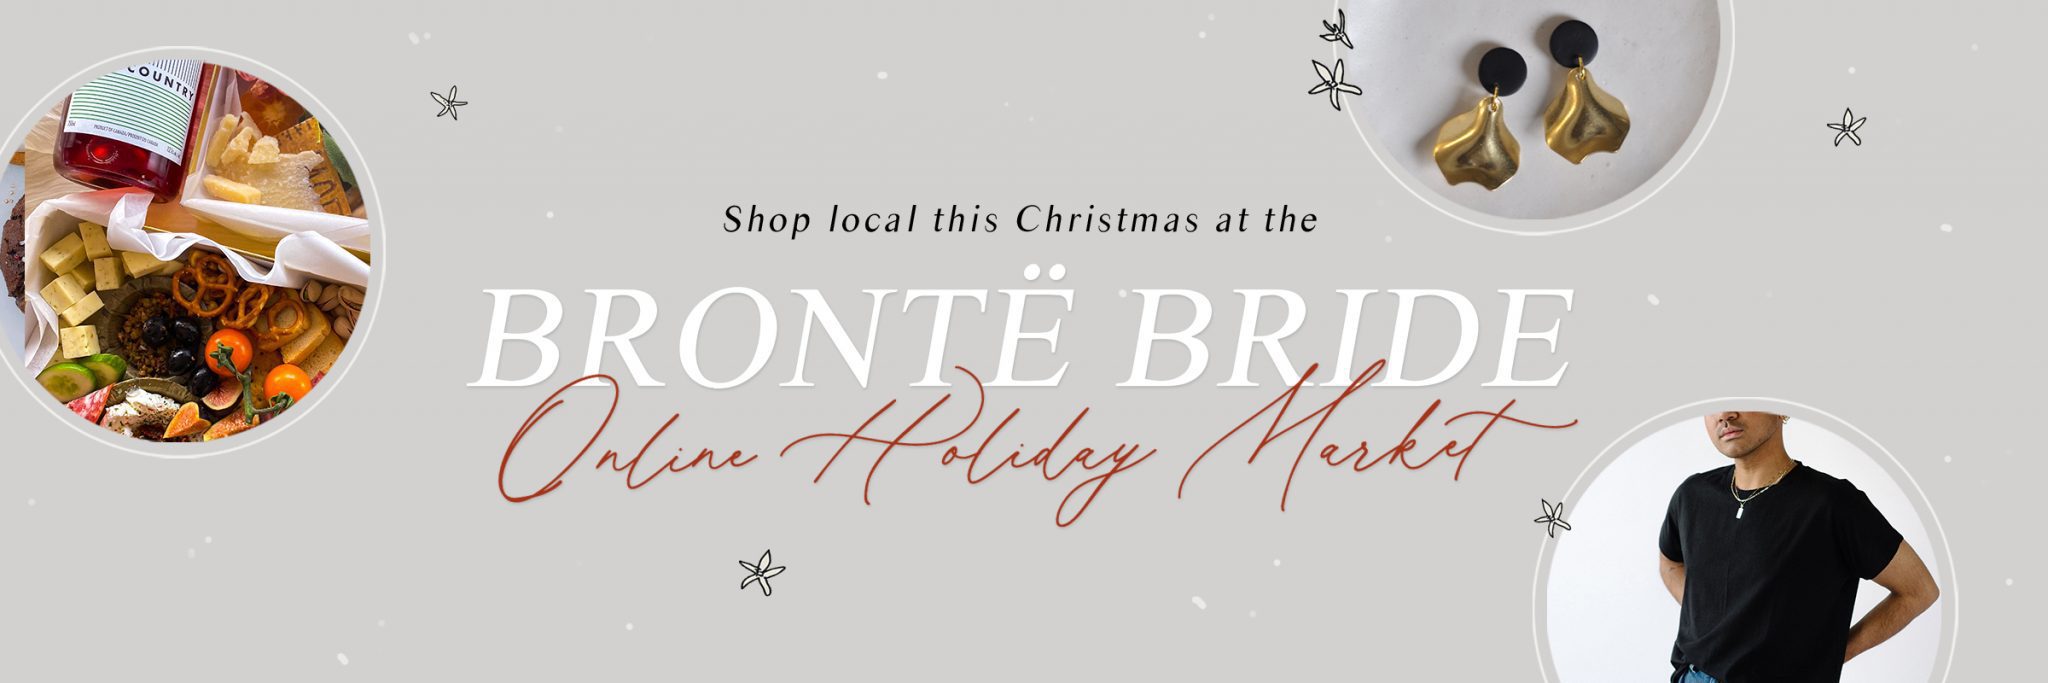 #letsshoplocal!
Calgary gifts and goods on the Bronte Bride Online Holiday Market